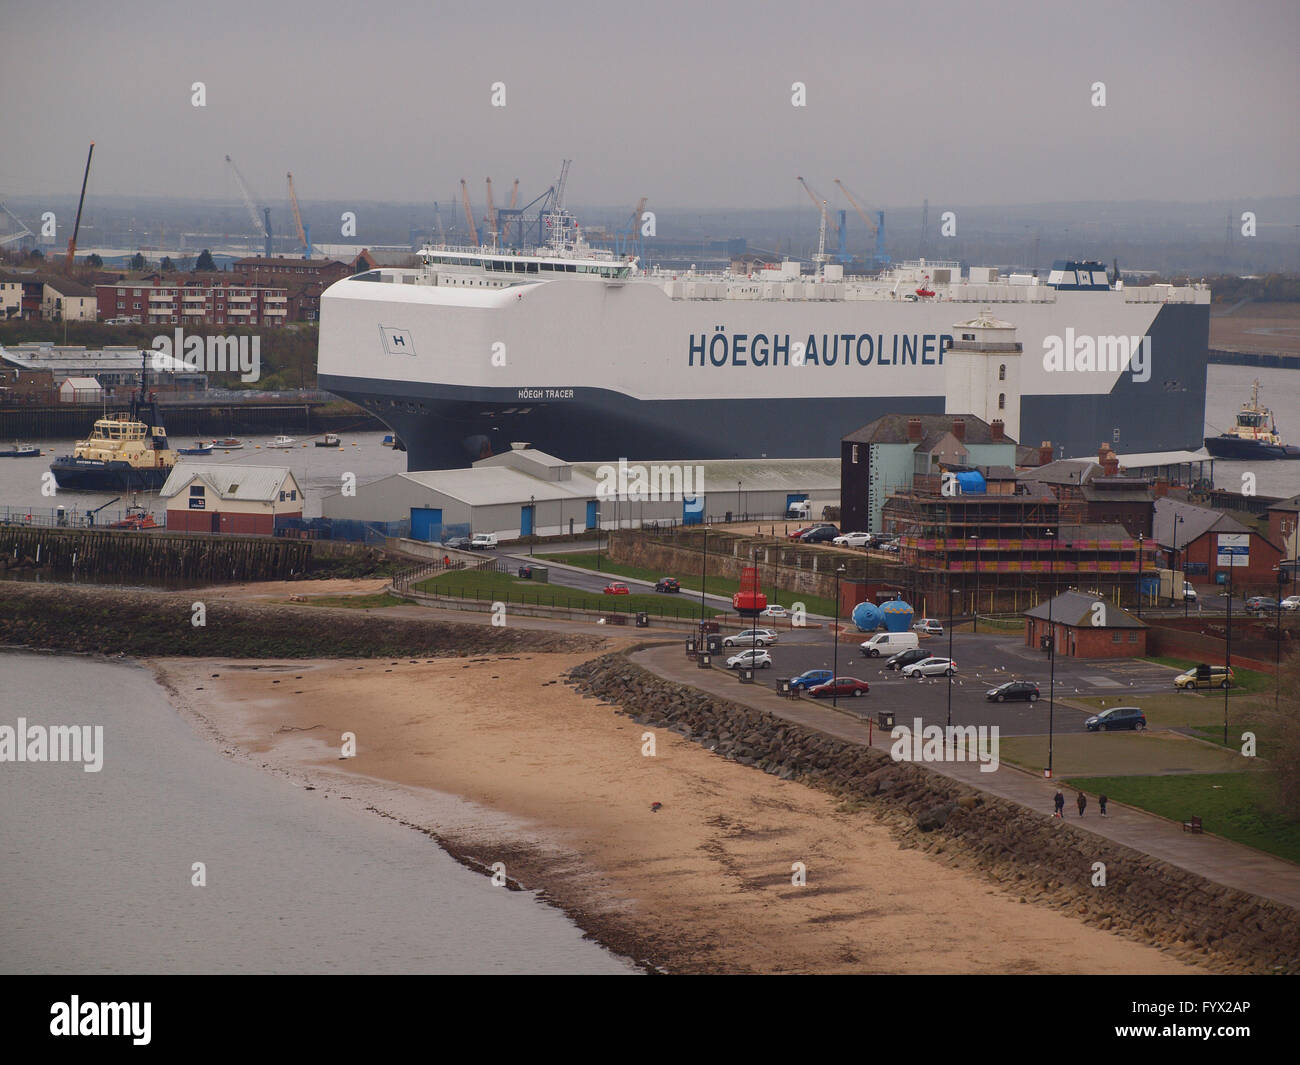 Newcastle Upon Tyne, 28th April 2016, UK Weather. The 76420ton autoliner ''Hoegh Tracer''  sails into the North Sea from the Nissan car terminal at the Port of Tyne on a showery day. Hoegh Tracer is a brand new ship and is the third in a series of six post panamax vessels under the new horizon design, the first two ships been Hoegh Target and Trigger. The vessel has a car and truck carrying capacity of 8.500 vehicles and the hull has been optimized under the new horizon design for larger cargo's and lower fuel consumption as well as added wind resistance in heavy seas. Stock Photo